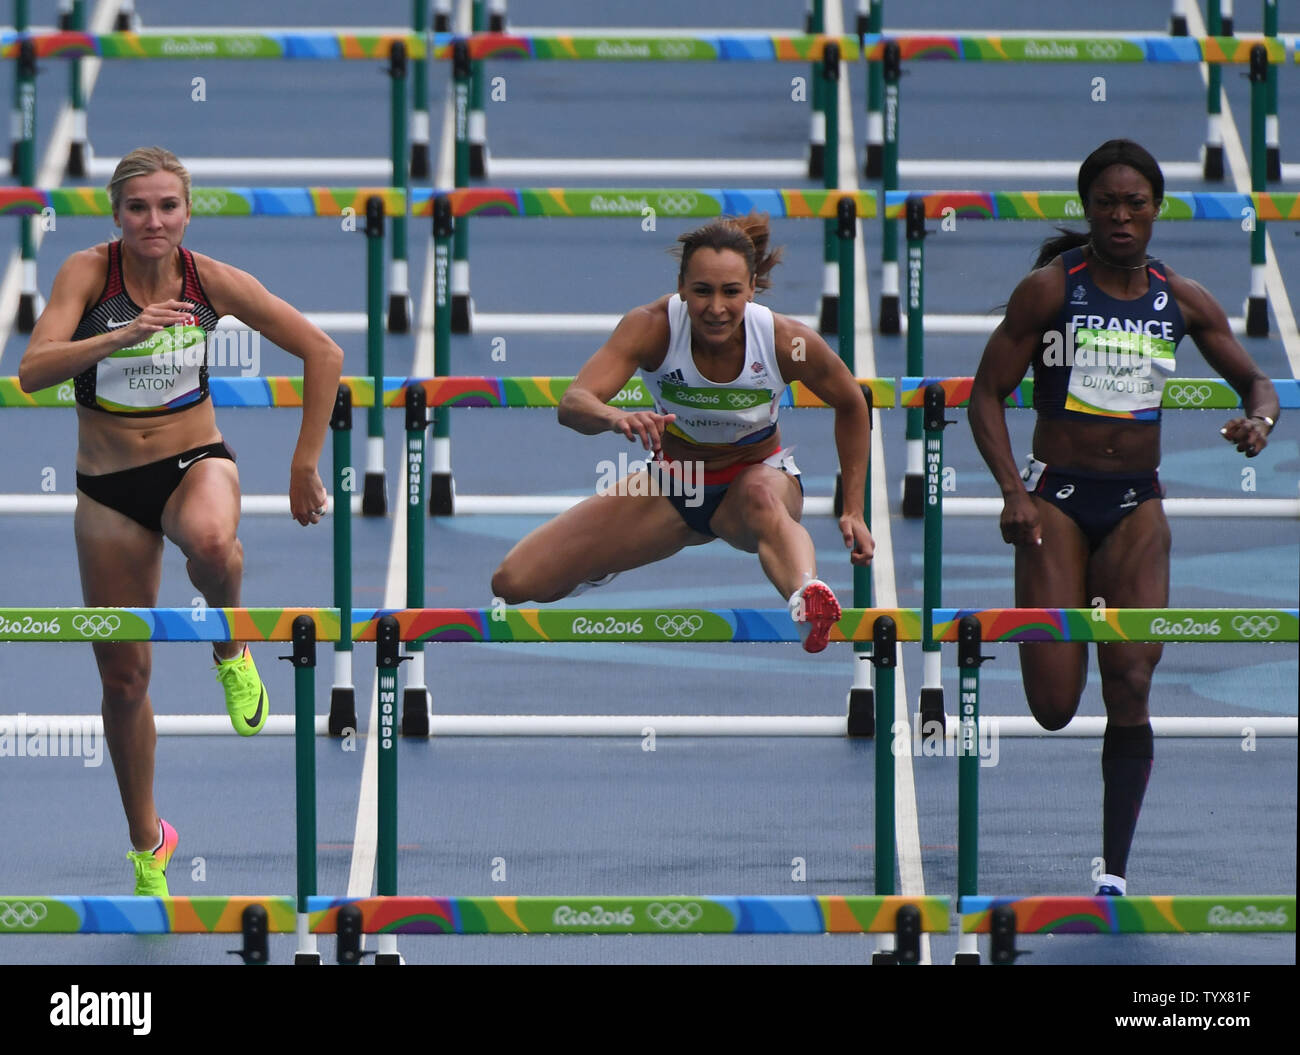 Jessica Ennis-Hill (C) takes a hurdle between Brianne Theisen Eaton of Canada(L) and Antoinette Nana Djimou Ida of France in a  heat of the Women's Heptathlon 100M Hurdles with WSA's Heather Miller-Koch at right is run in the Olympic Stadium at the 2016 Rio Summer Olympics in Rio de Janeiro, Brazil, August 12, 2016.  Ennis-Hill won the gold medal in London 2012 Olympics.    Photo by Terry Schmitt/UPI Stock Photo